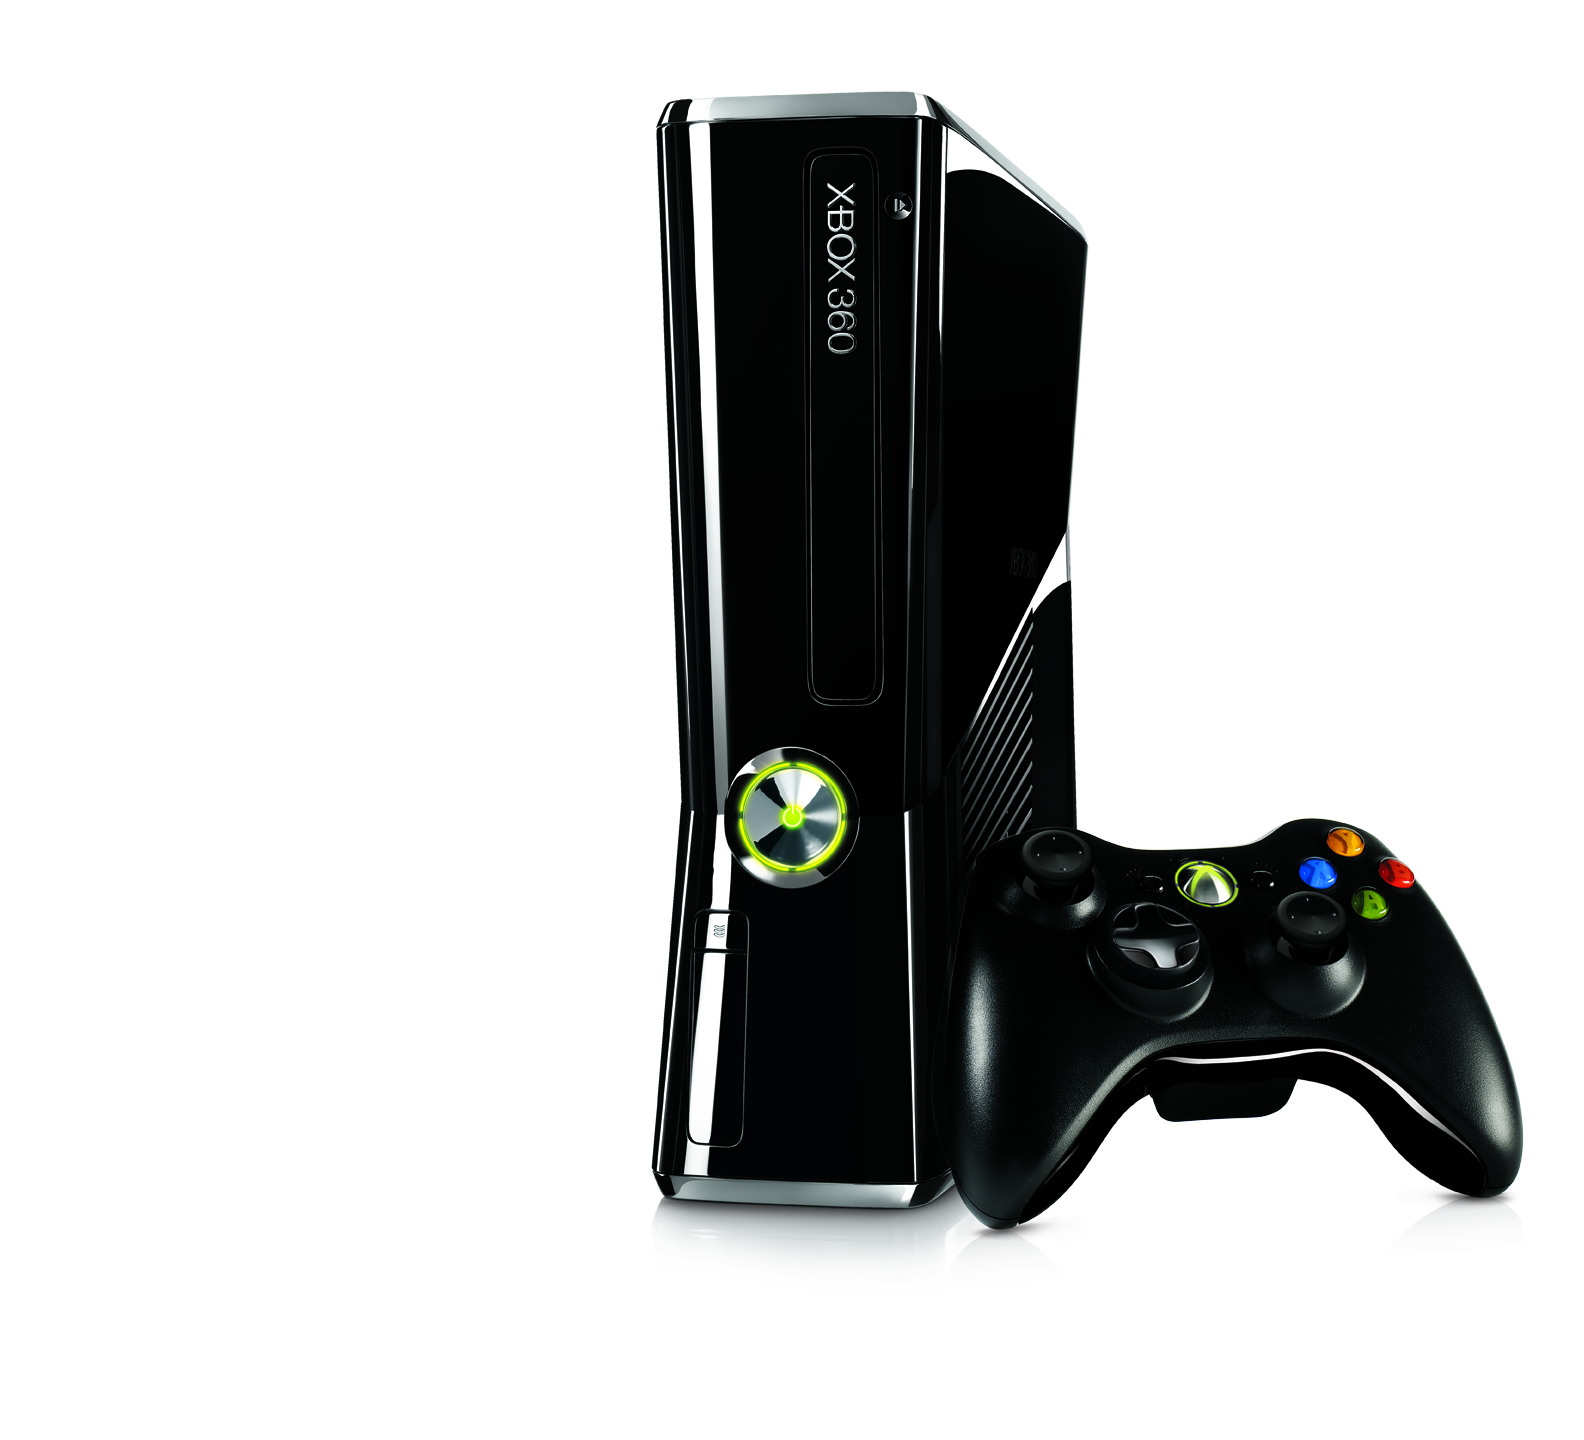 Wallpaper And Gadgets Xbox We Post Tecnology News